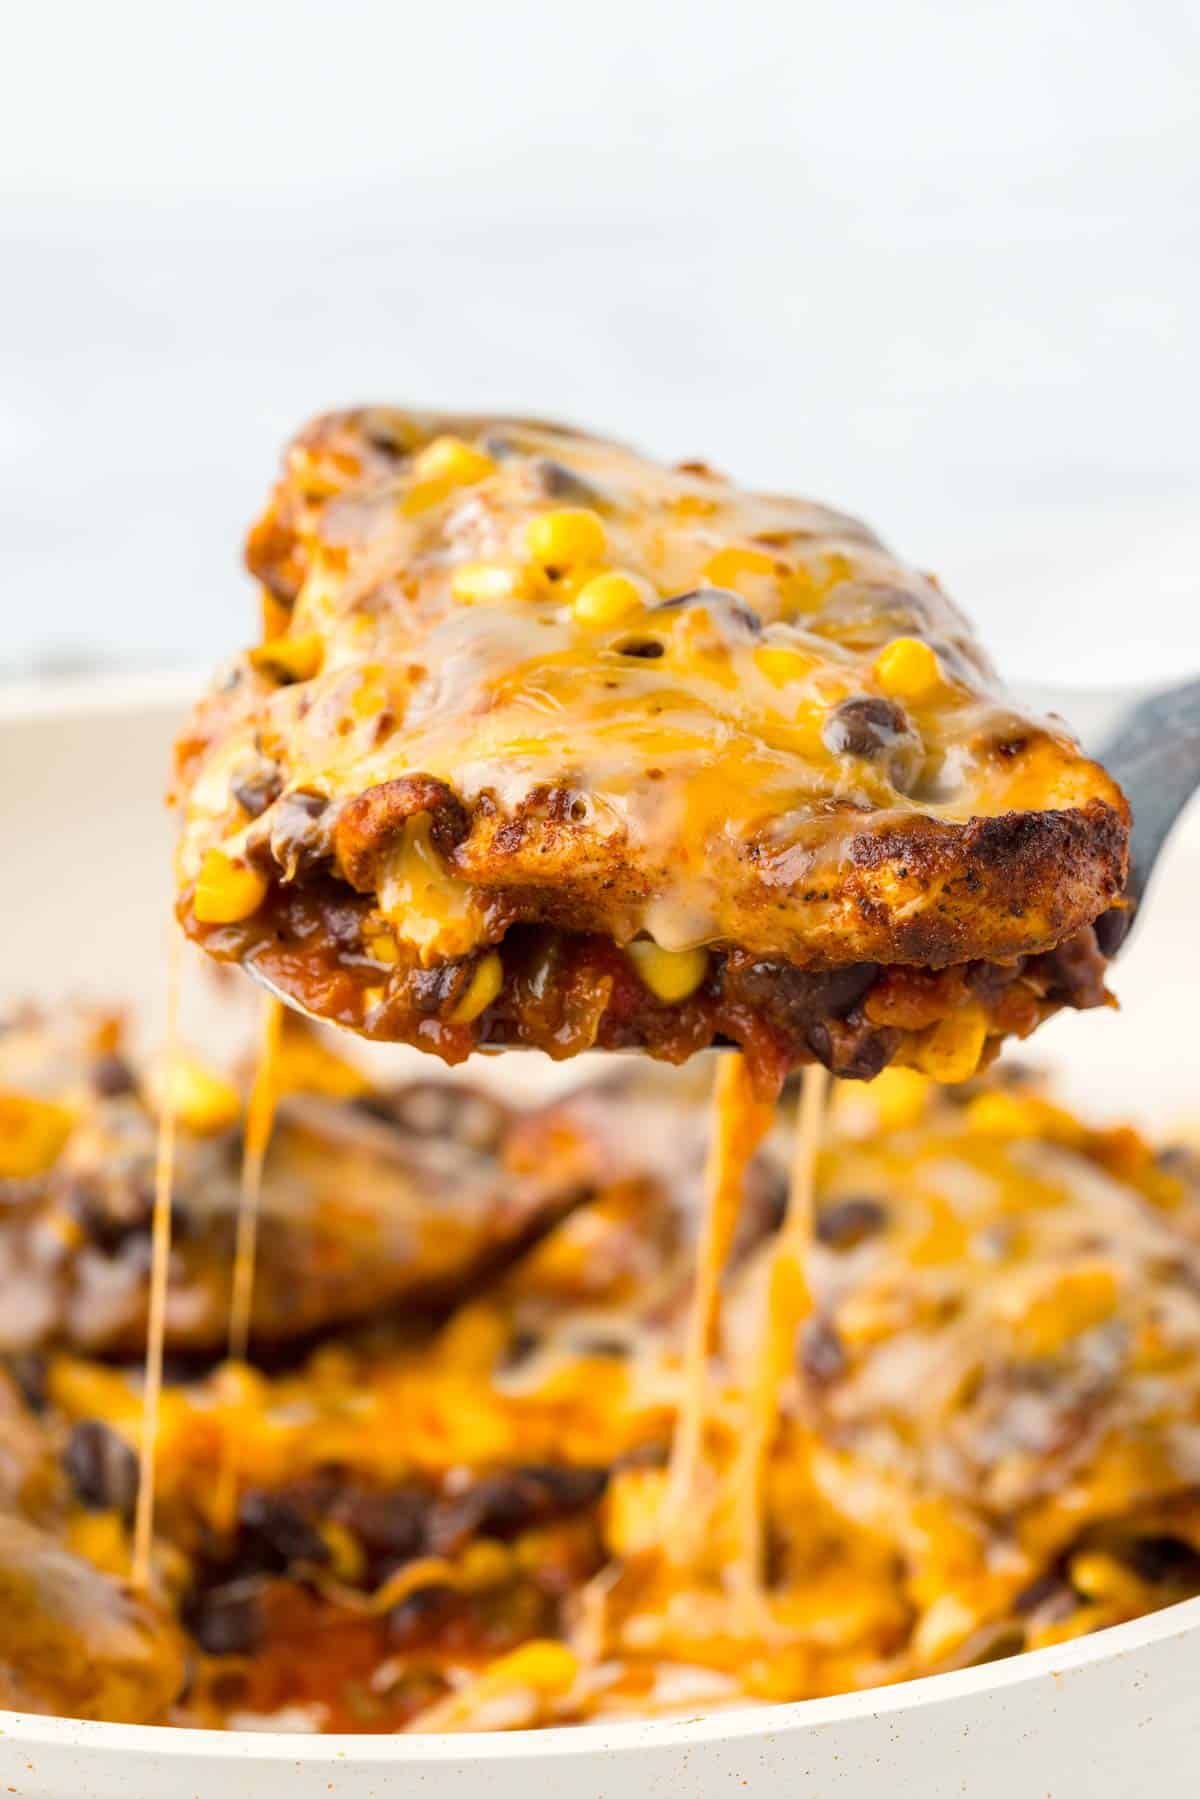 Santa Fe Chicken is a delicious skillet chicken breast dish loaded with spices, salsa, black beans, corn and Colby Jack cheese.